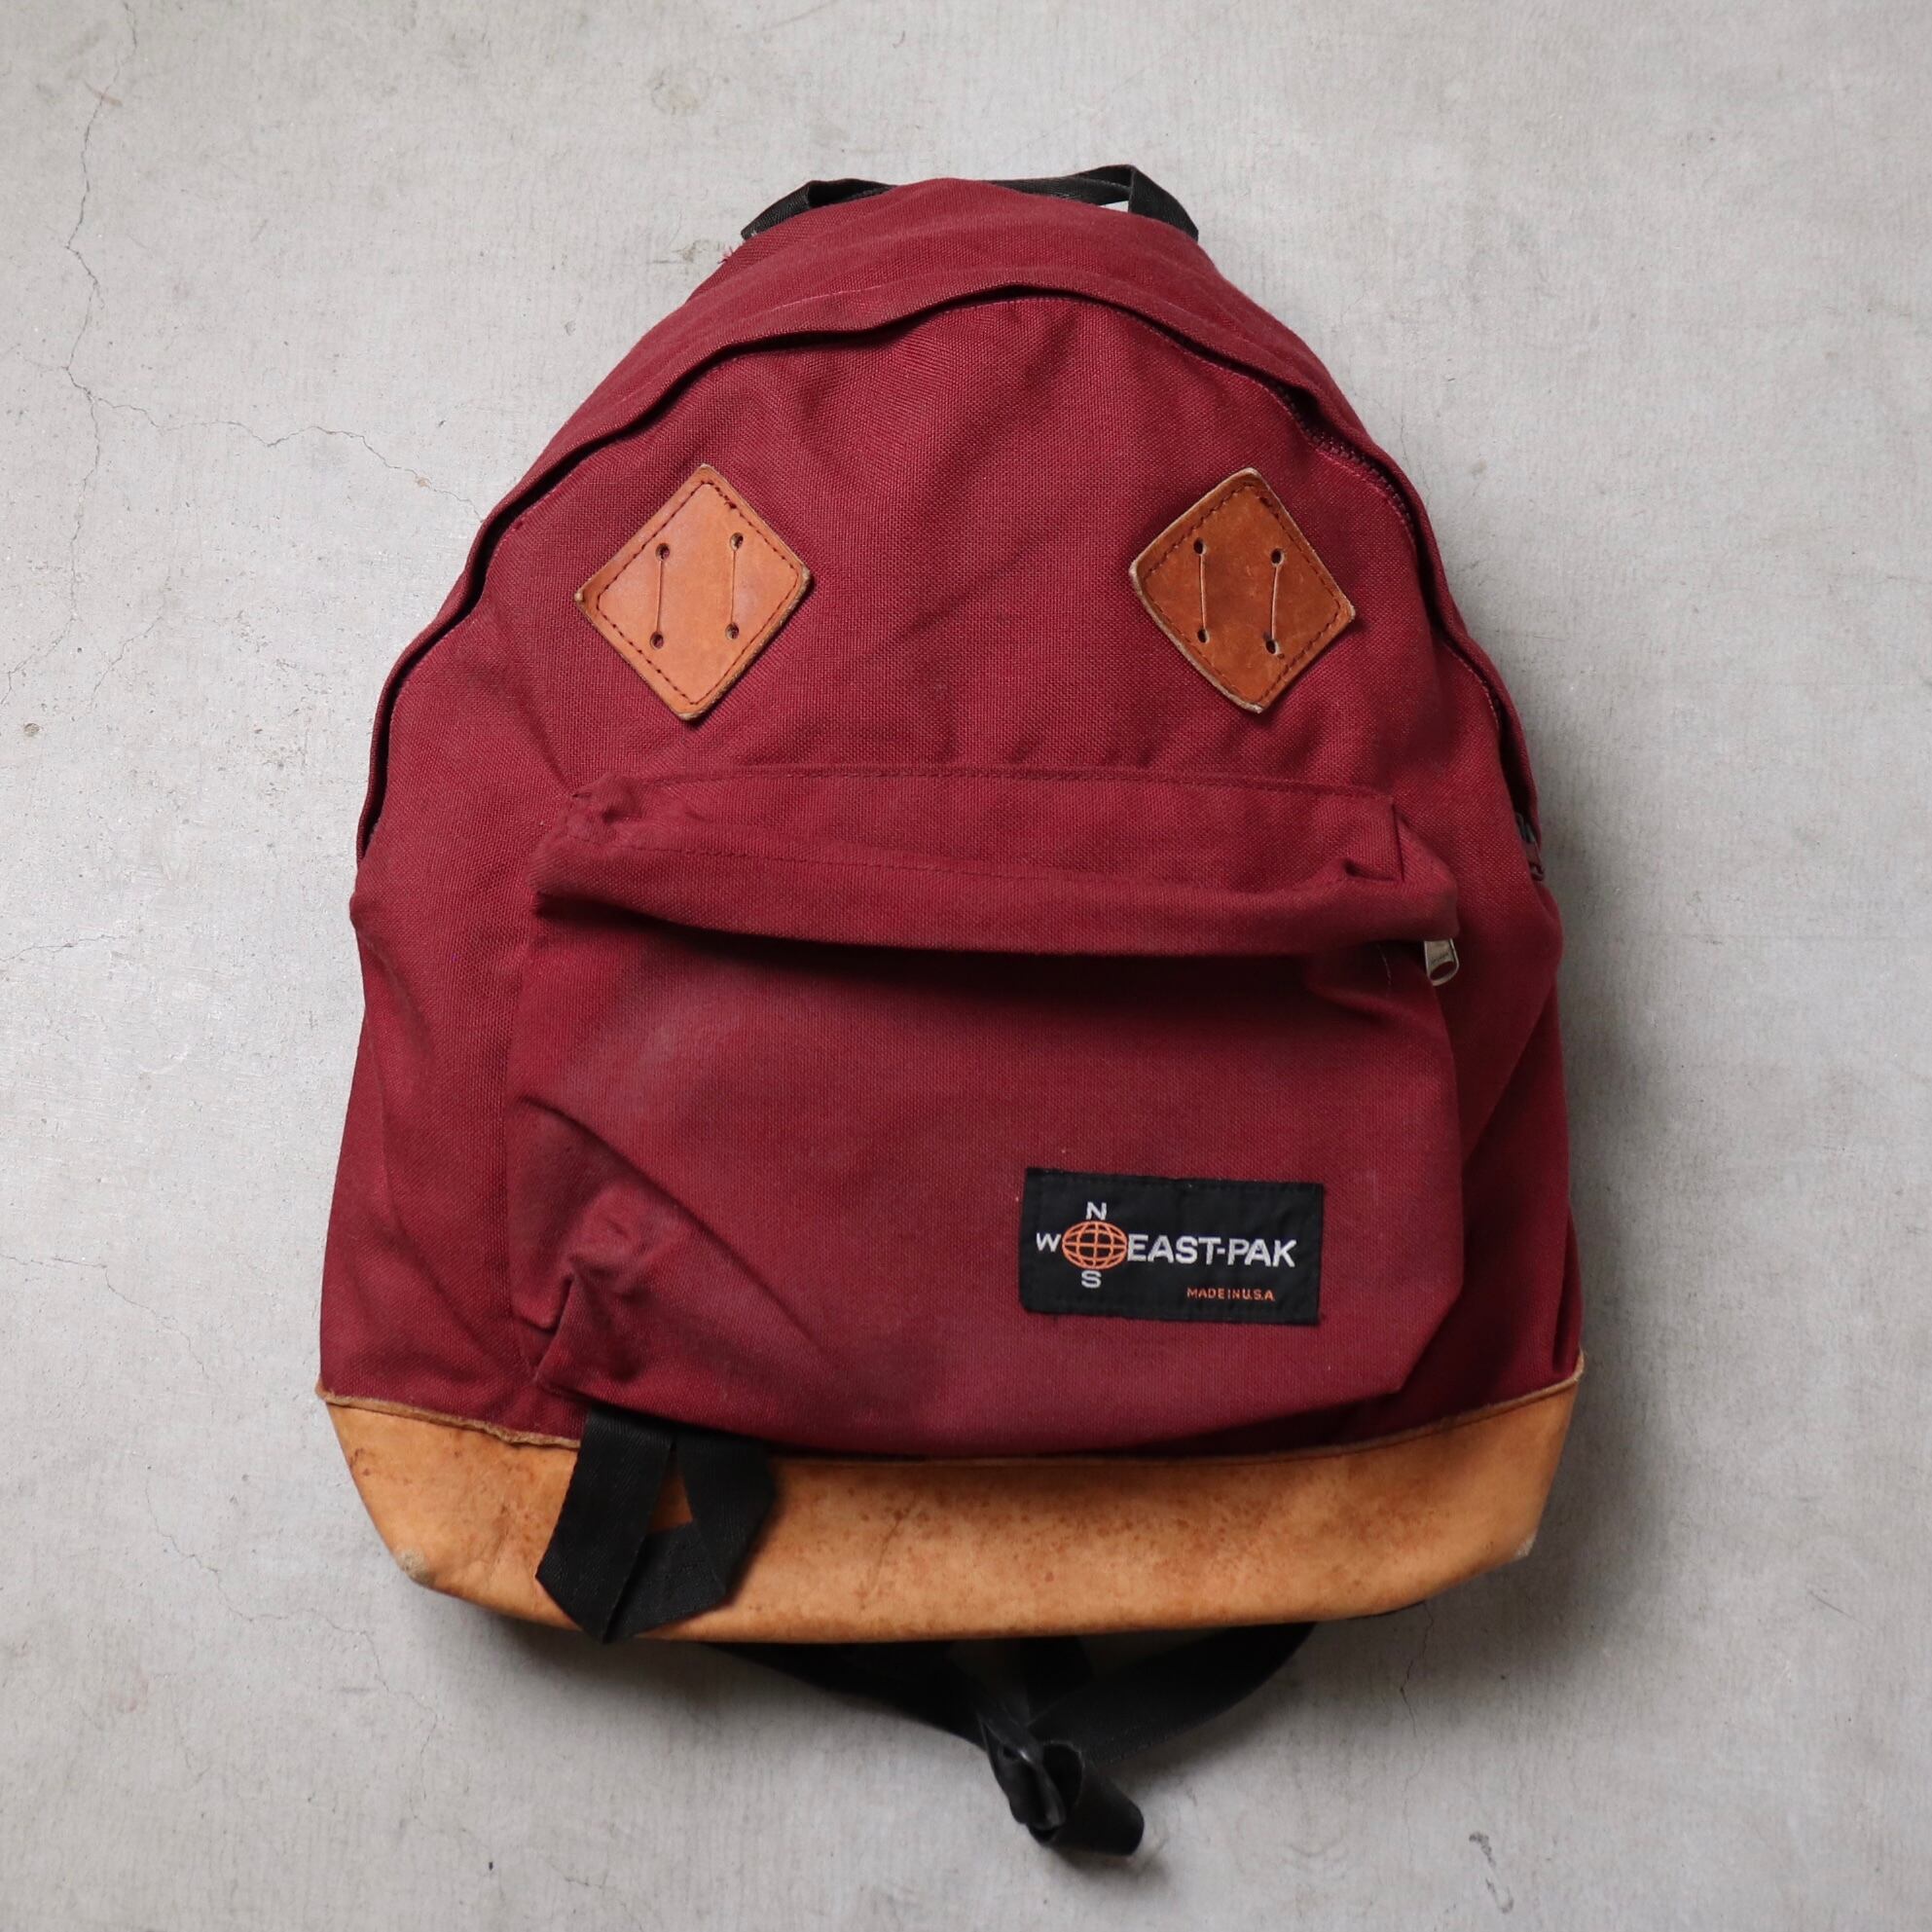 1980s EASTPAK バックパック ボトムレザー Made in USA　D170 | ROGER'S used clothing -  ロジャース - powered by BASE